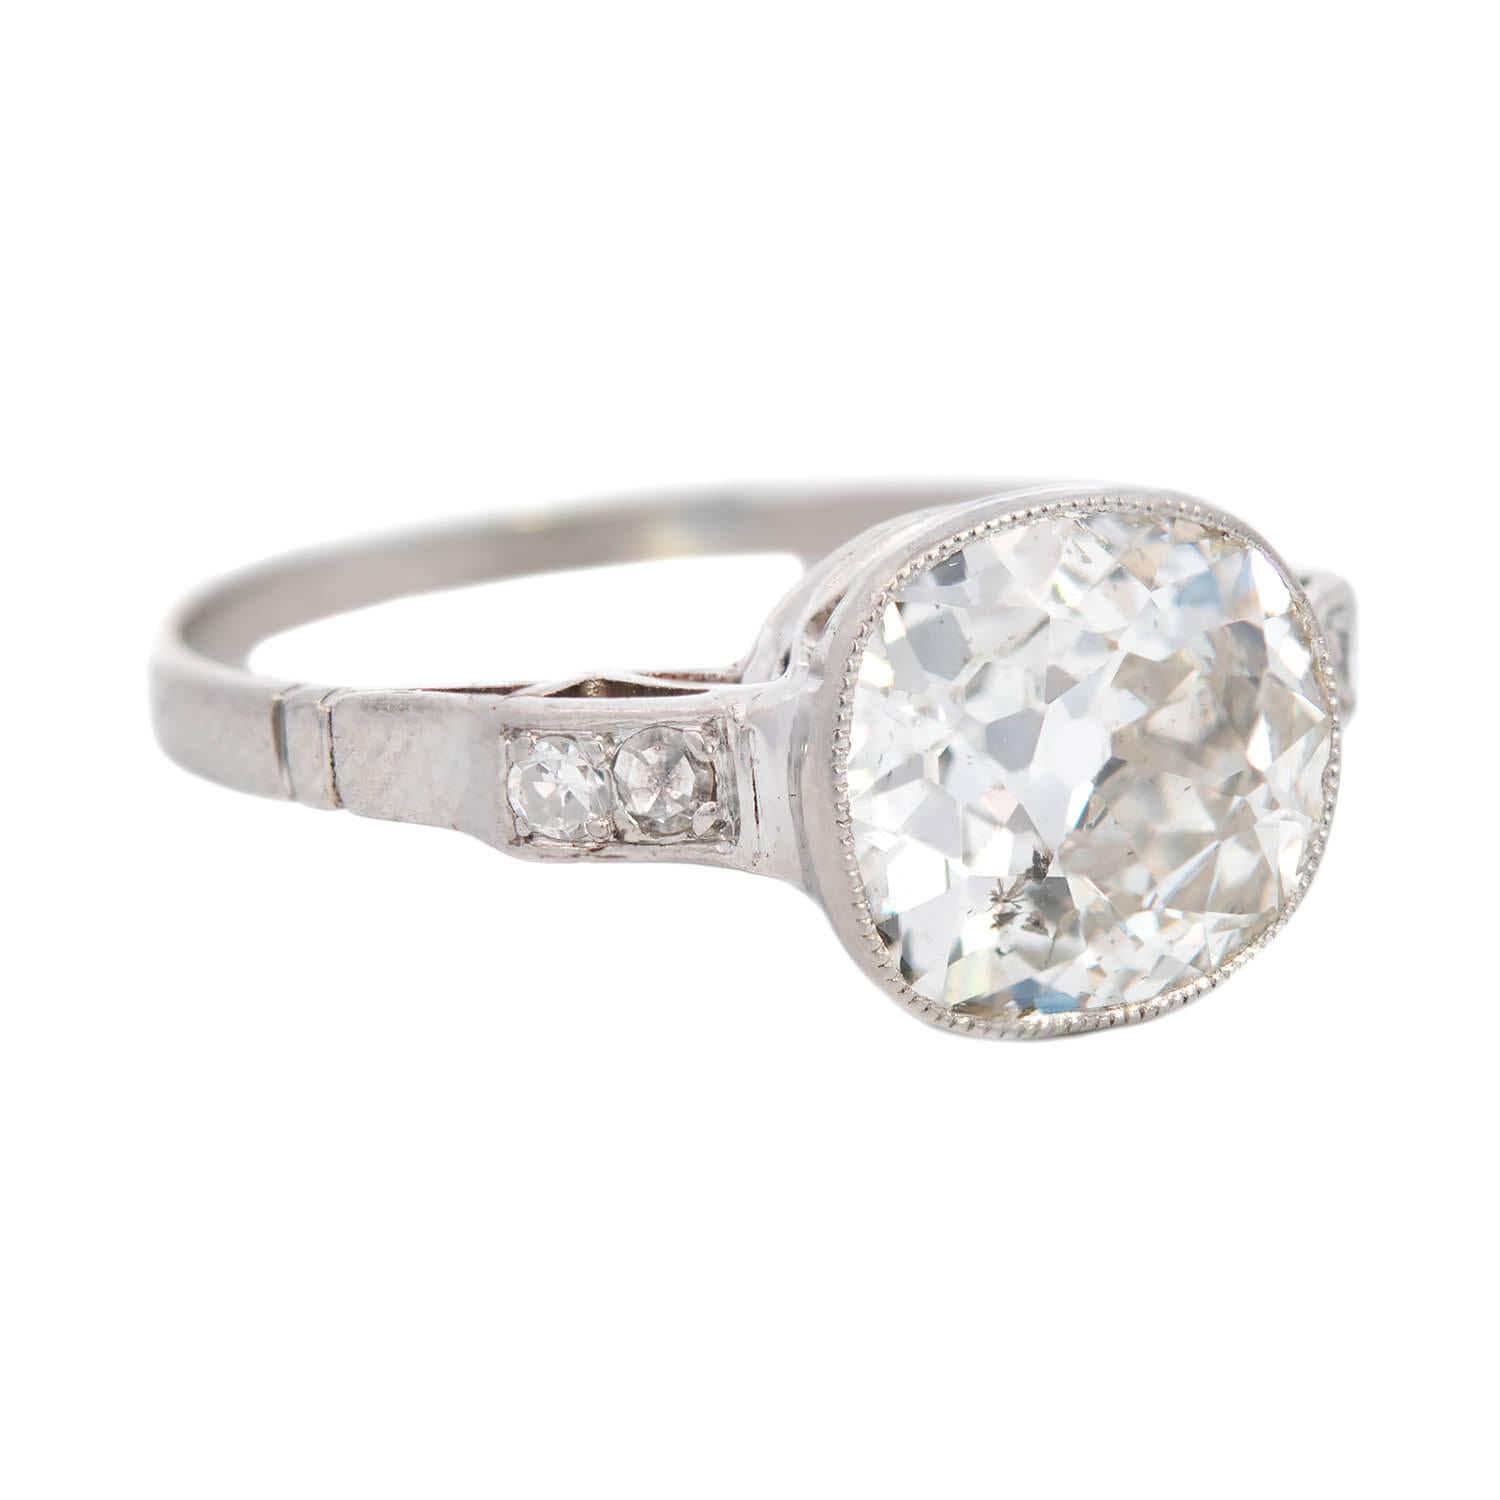 A stunning diamond engagement ring from the late Art Deco (ca1930) era! Crafted in platinum, this gorgeous piece features a stunning old Cushion Cut diamond at its center that weighs approximately 2.06ct and displays I/J color and SI2 clarity,